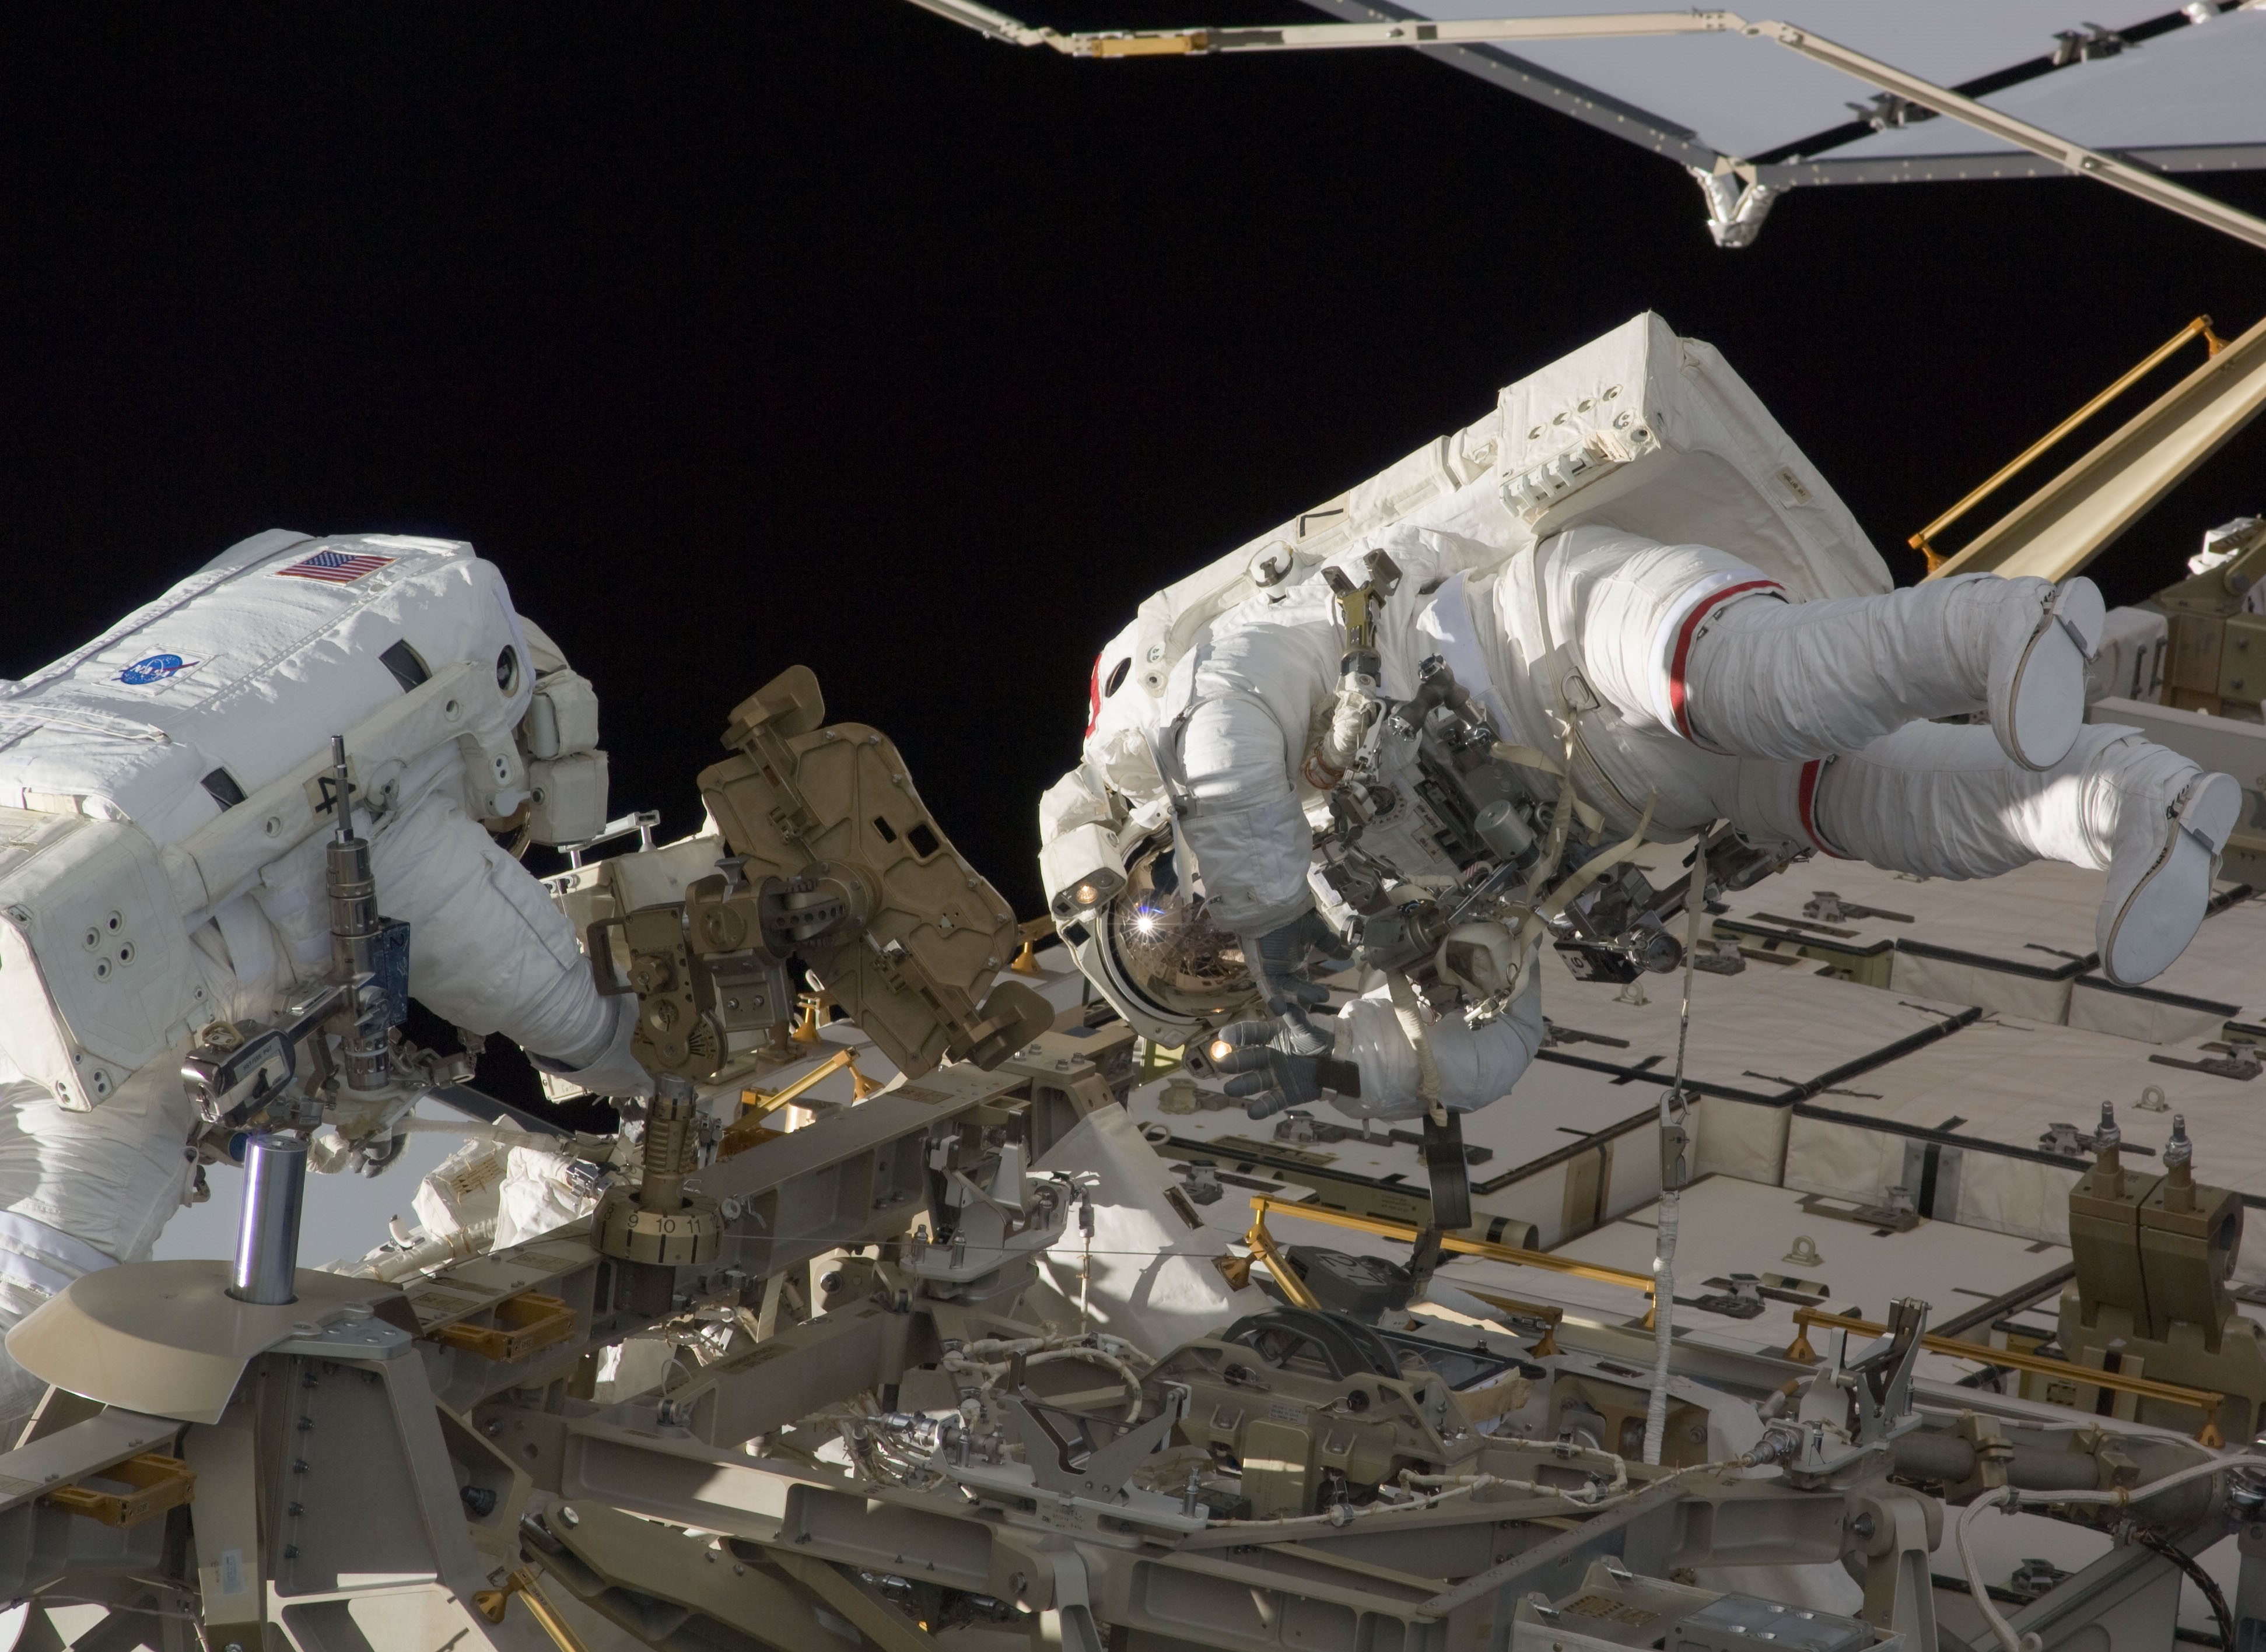 Timothy L. Kopra, left, and David A. Wolf work on the station’s truss during the mission’s first spacewalk